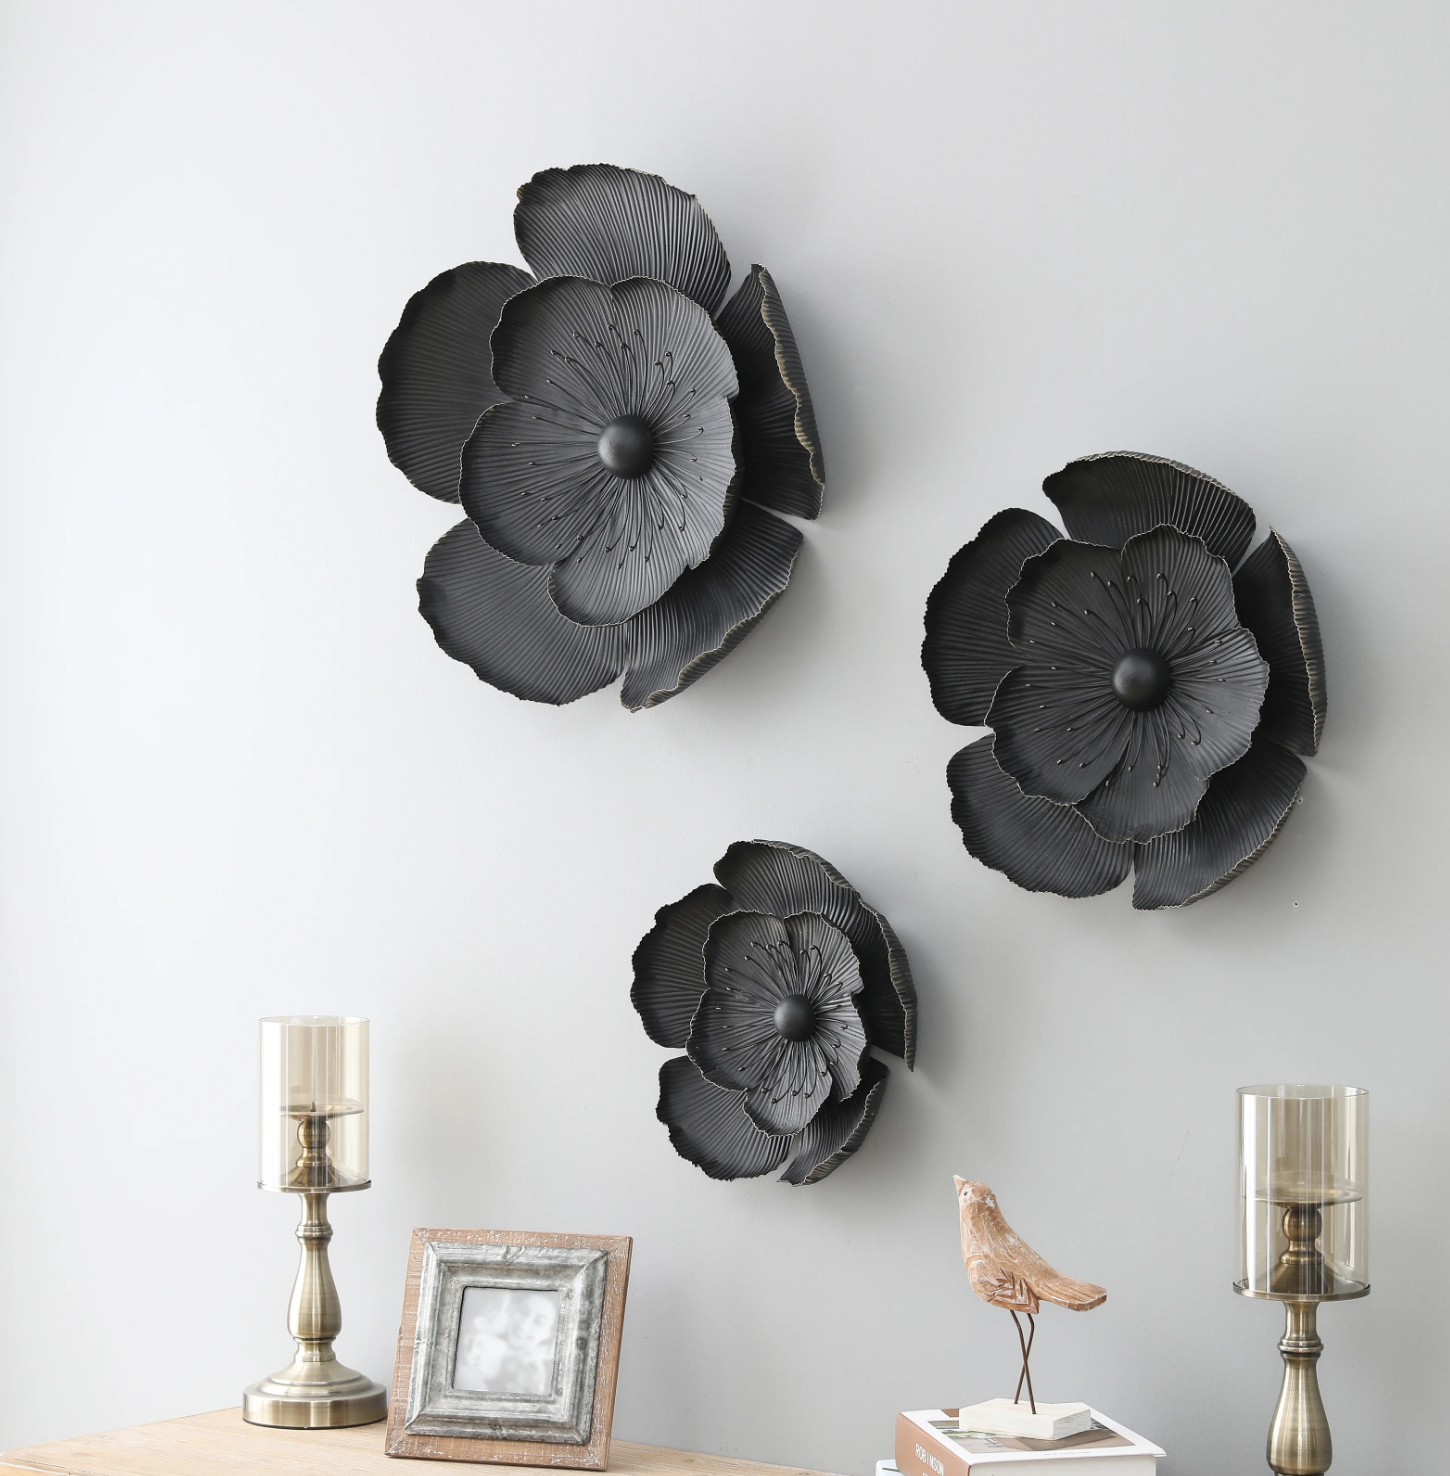 The three flowers above a console table